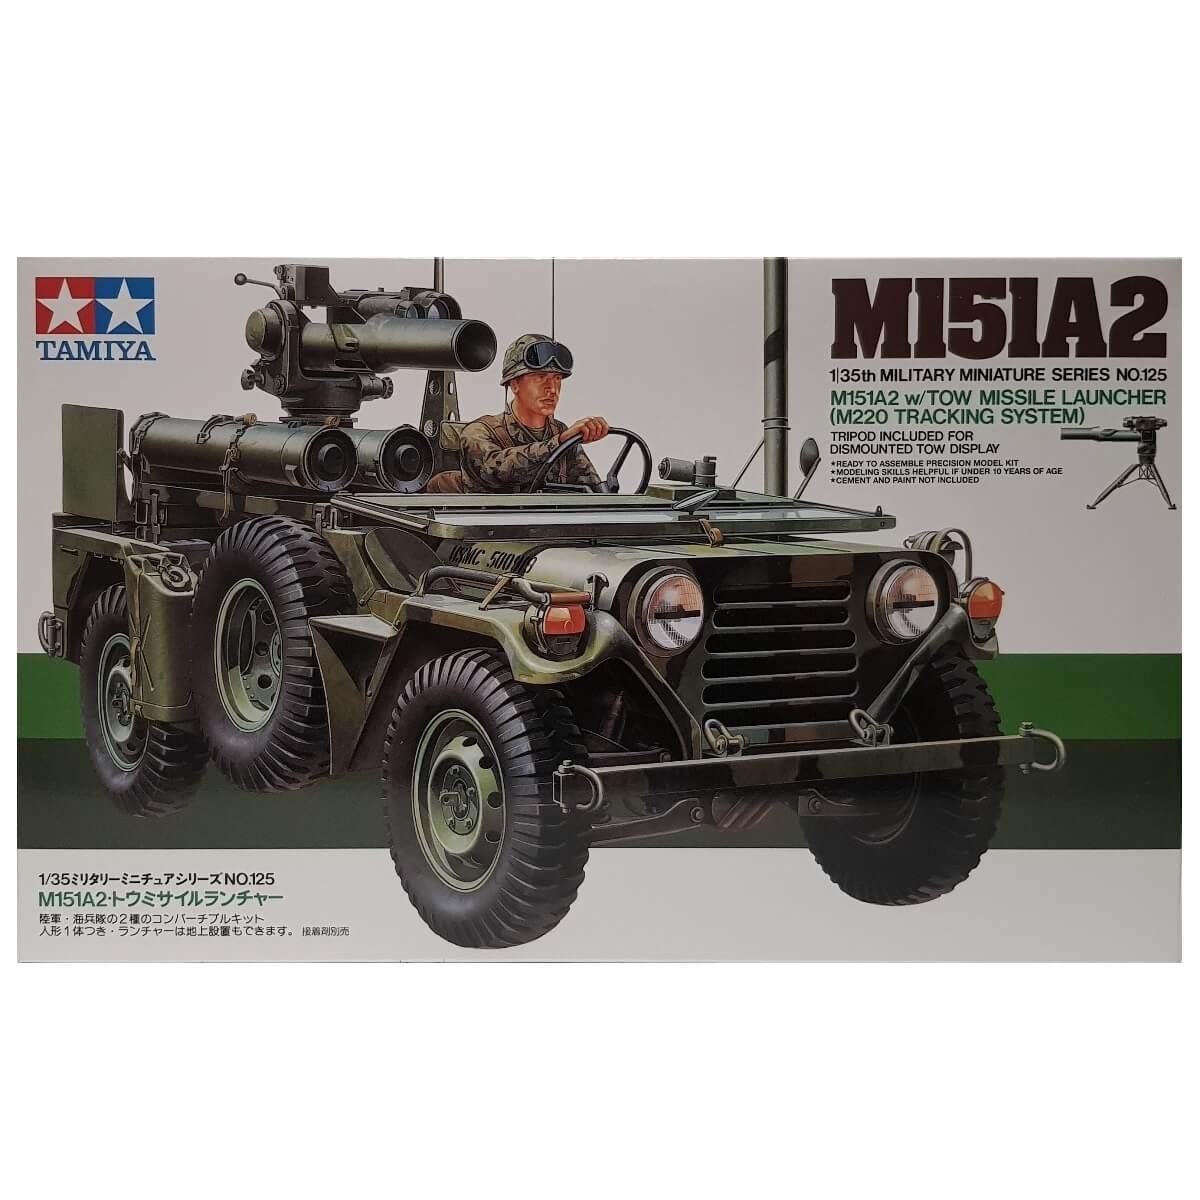 1:35 US M151A2 with TOW Missile Launcher - M220 Tracking System - TAMIYA